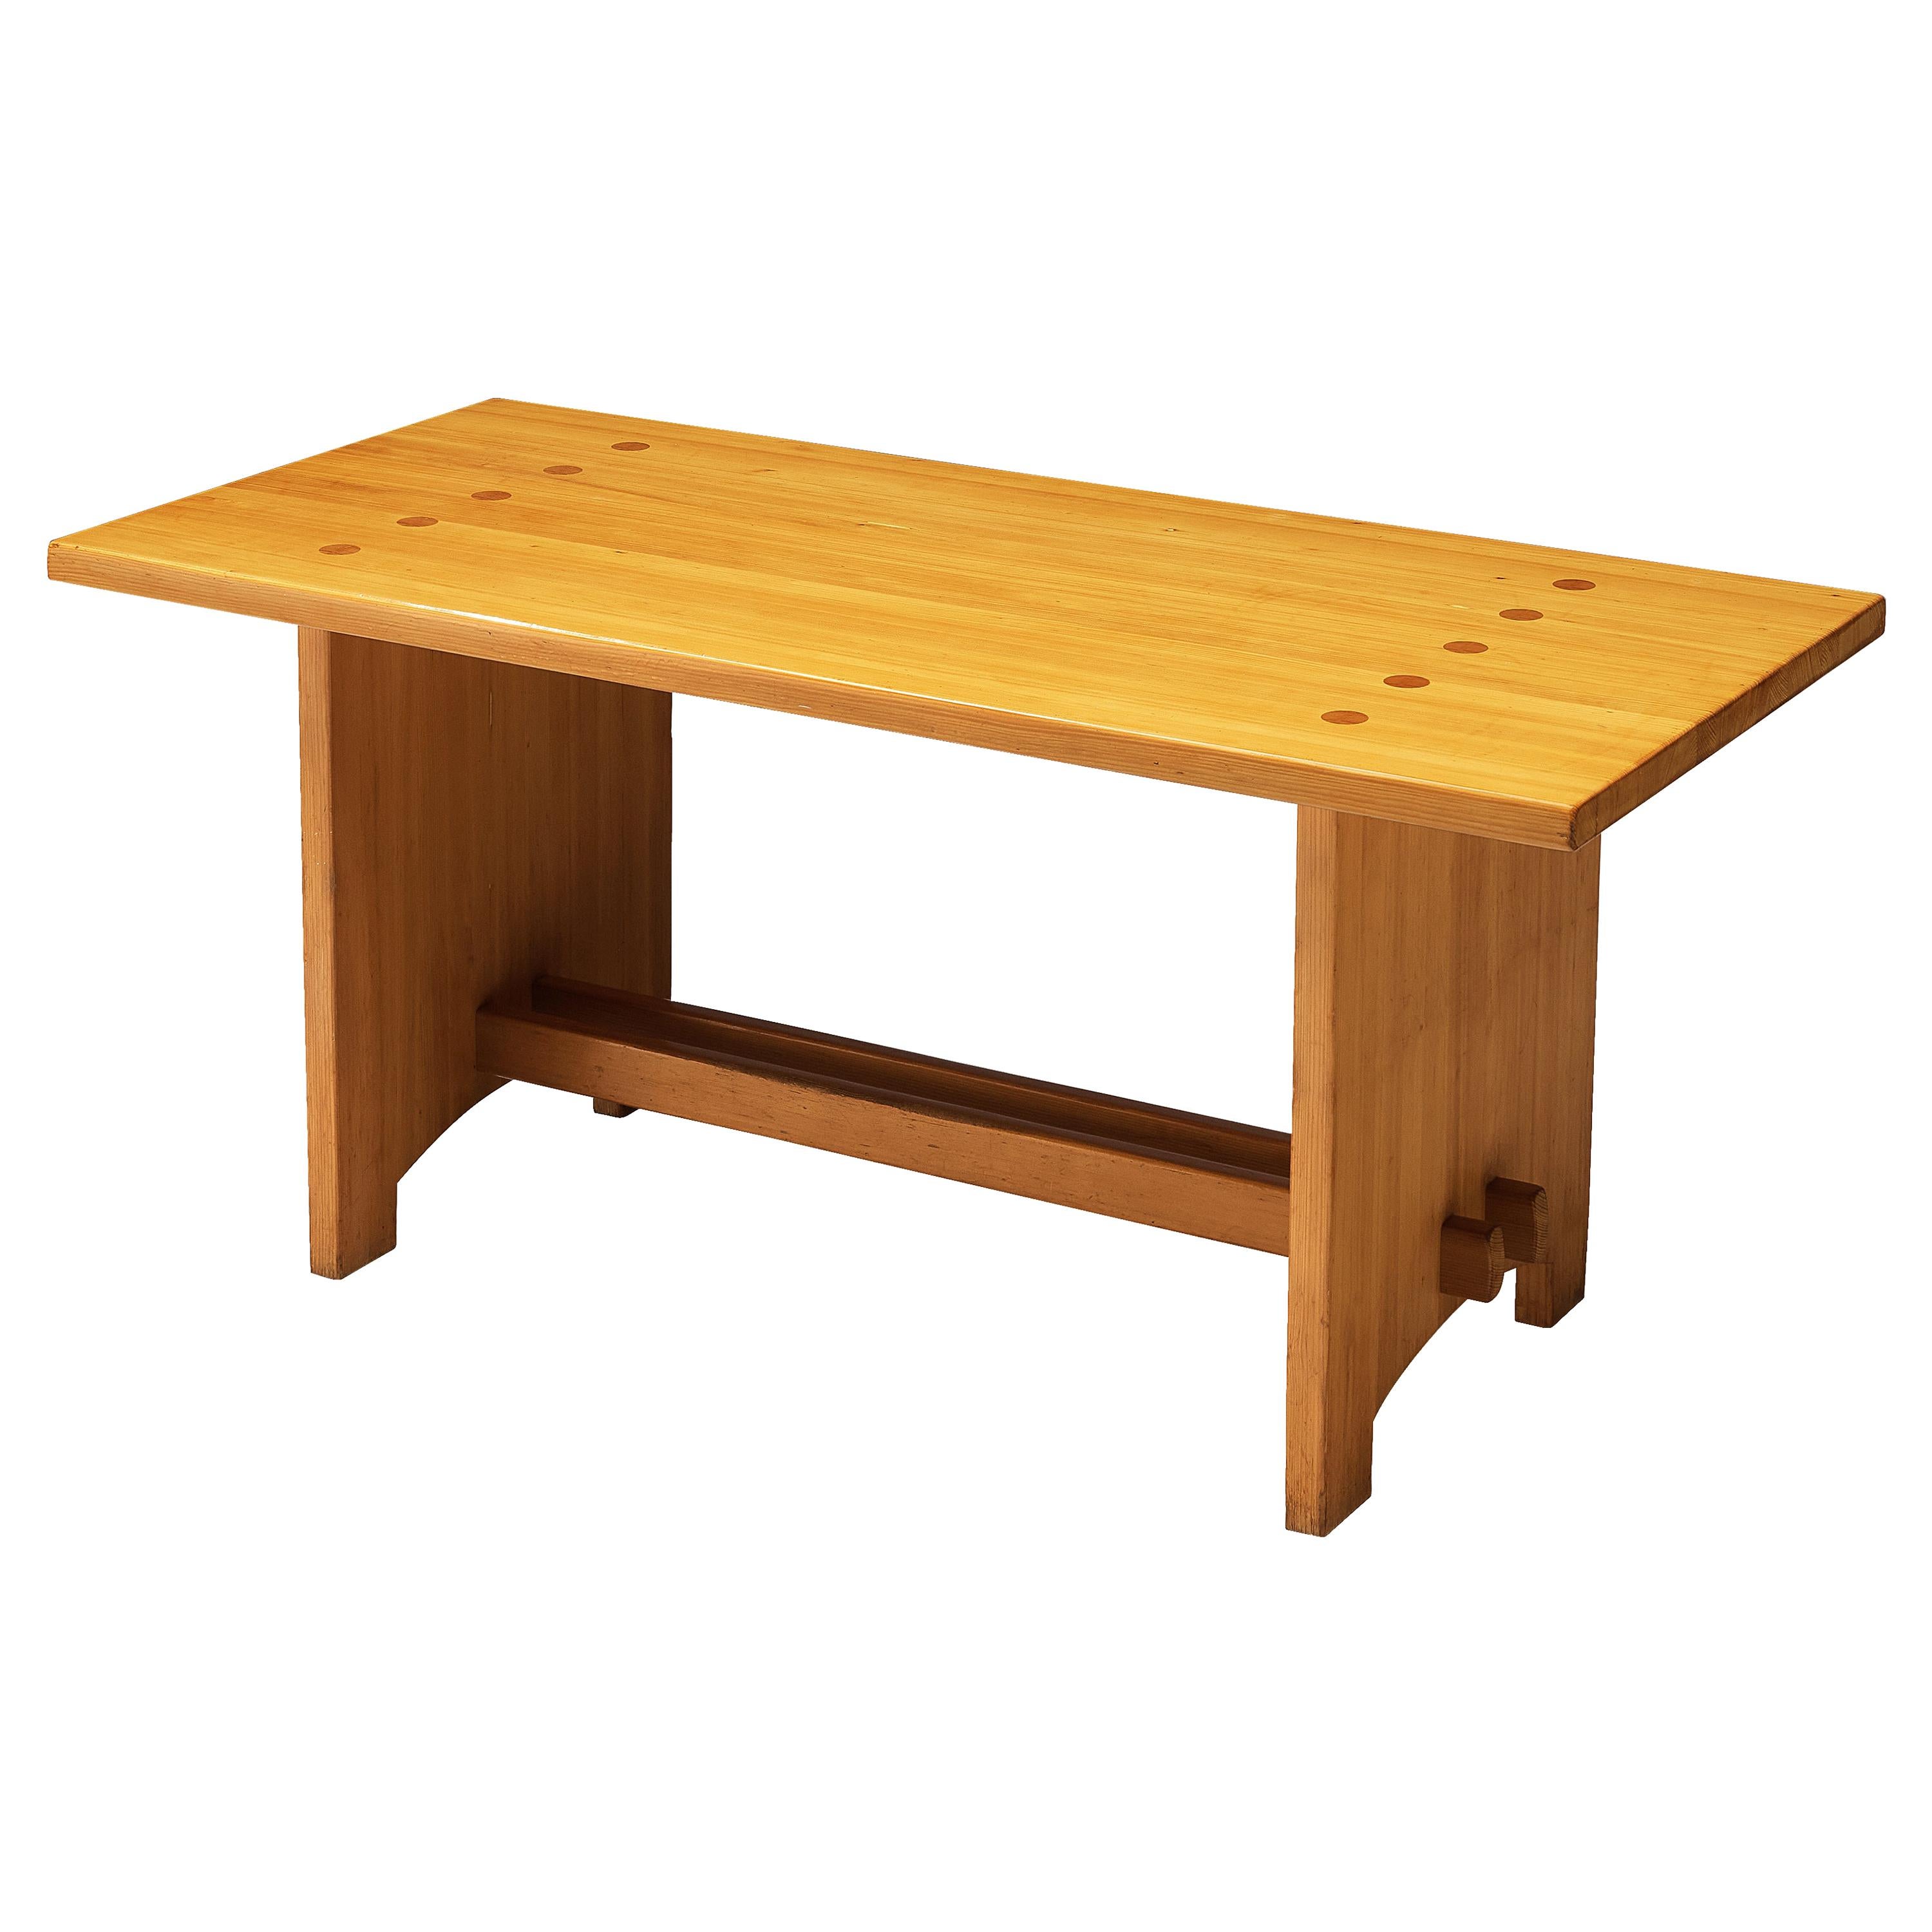 Jacob Kielland-Brandt Dining Table in Solid Pine For Sale